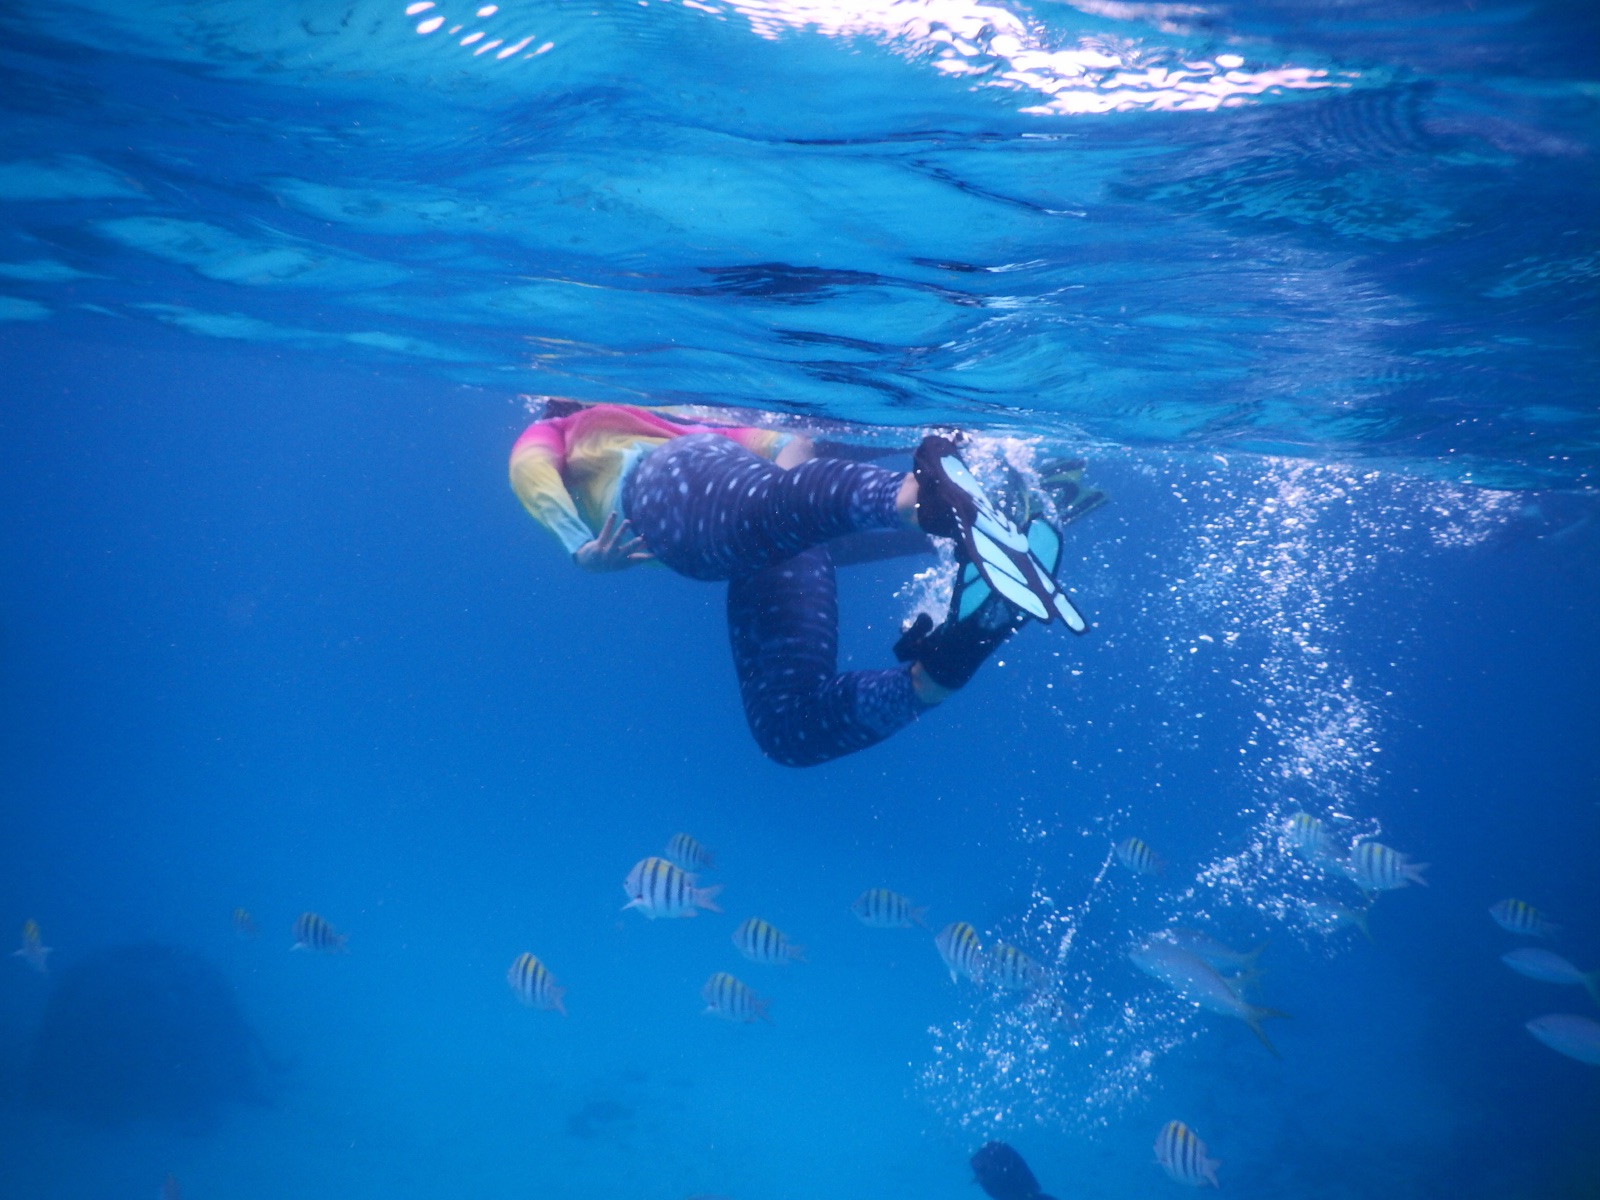 A student snorkeling in the water